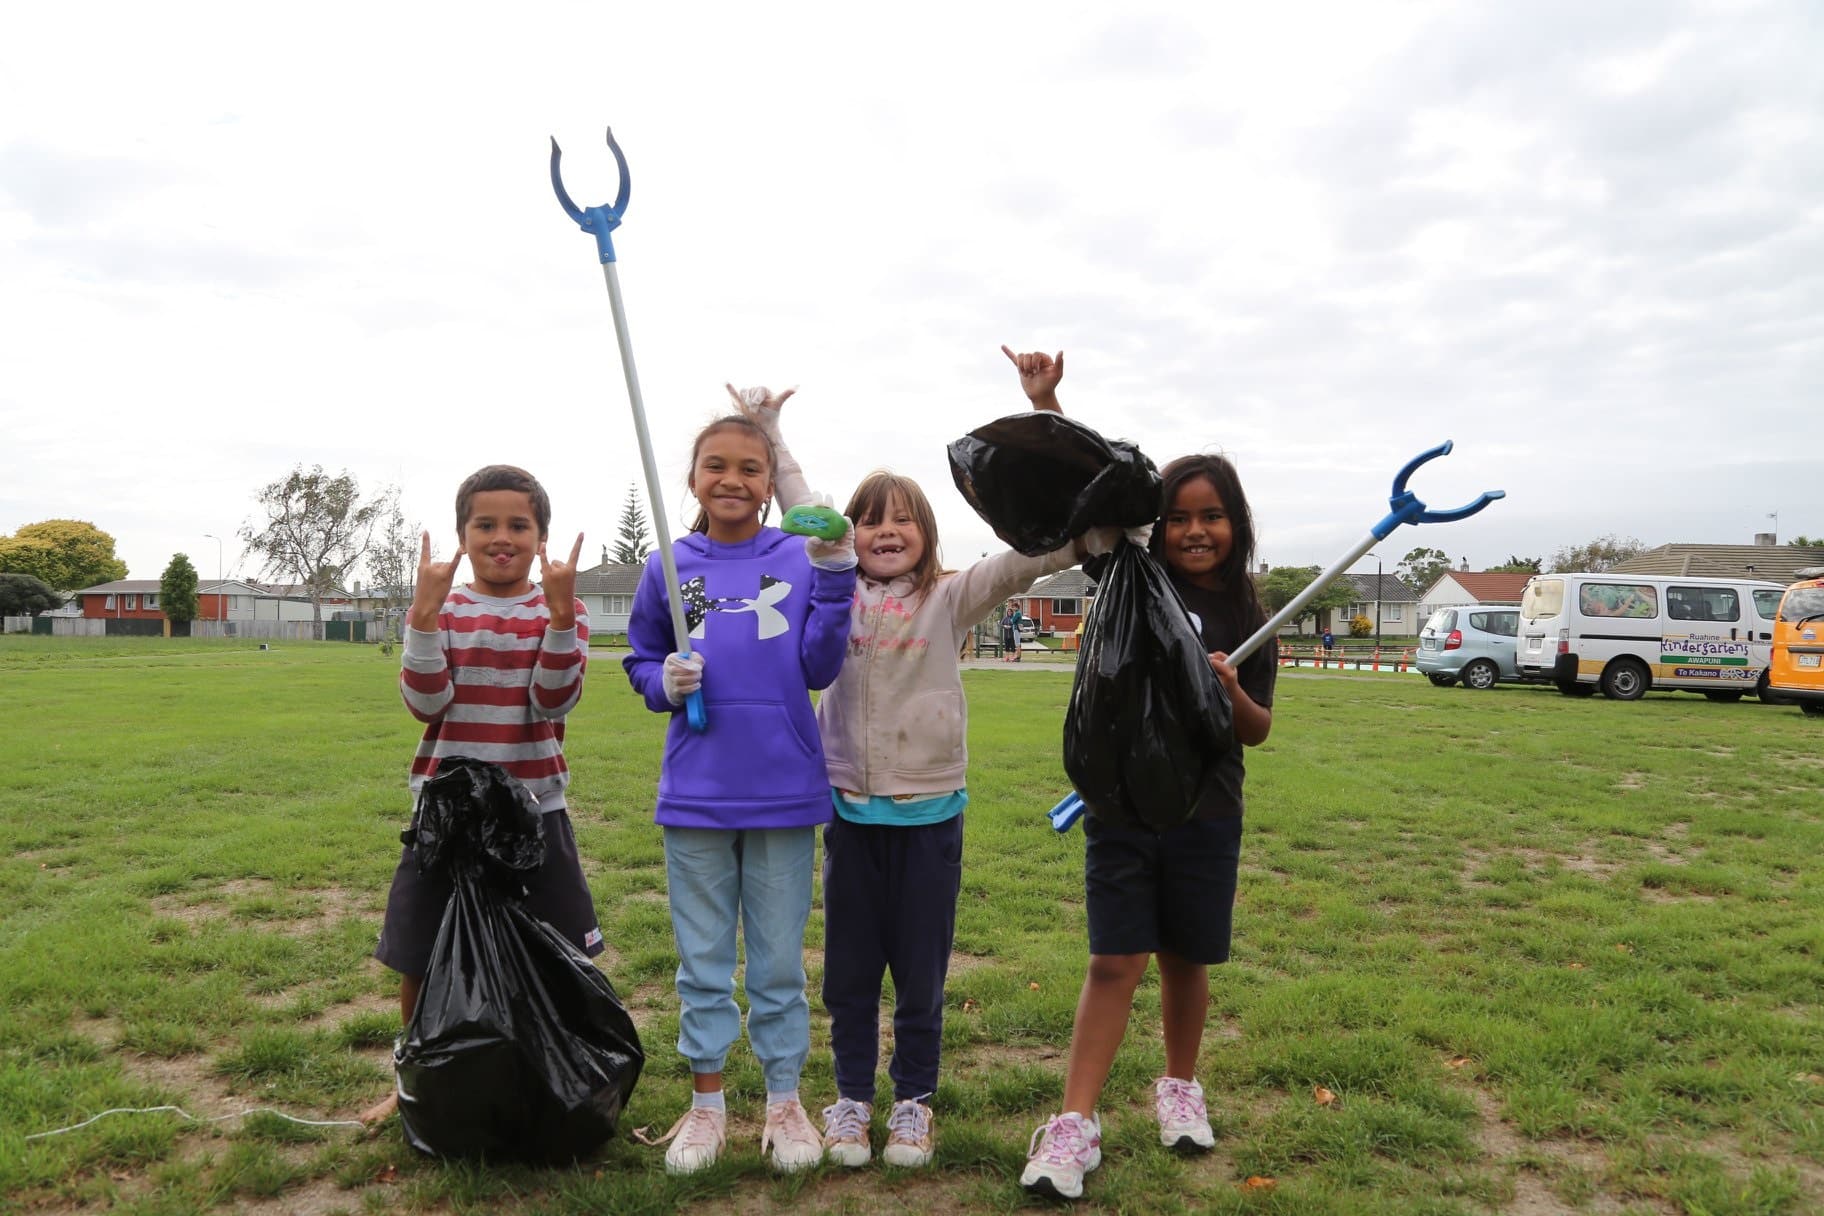 Four children holding up shovels and a blue rake at a Community Cleanup Event